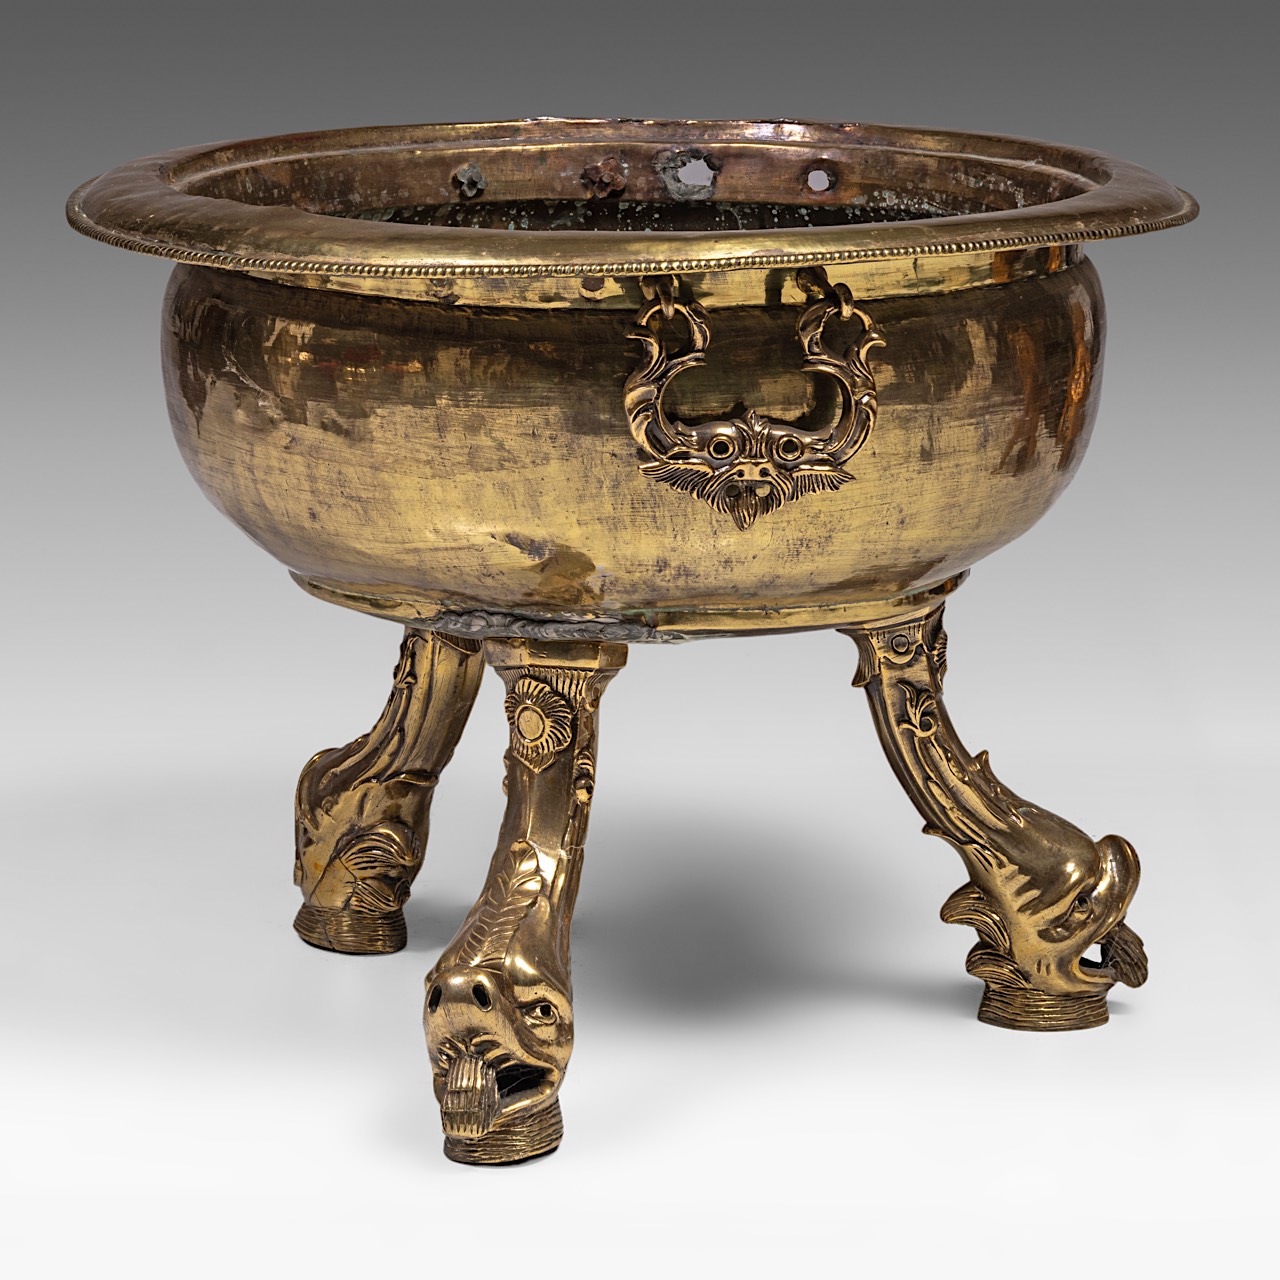 A brass wine cooler, the feet moddeled as dolphins, ca. 1700, H 47 - dia 60 cm - Image 4 of 6